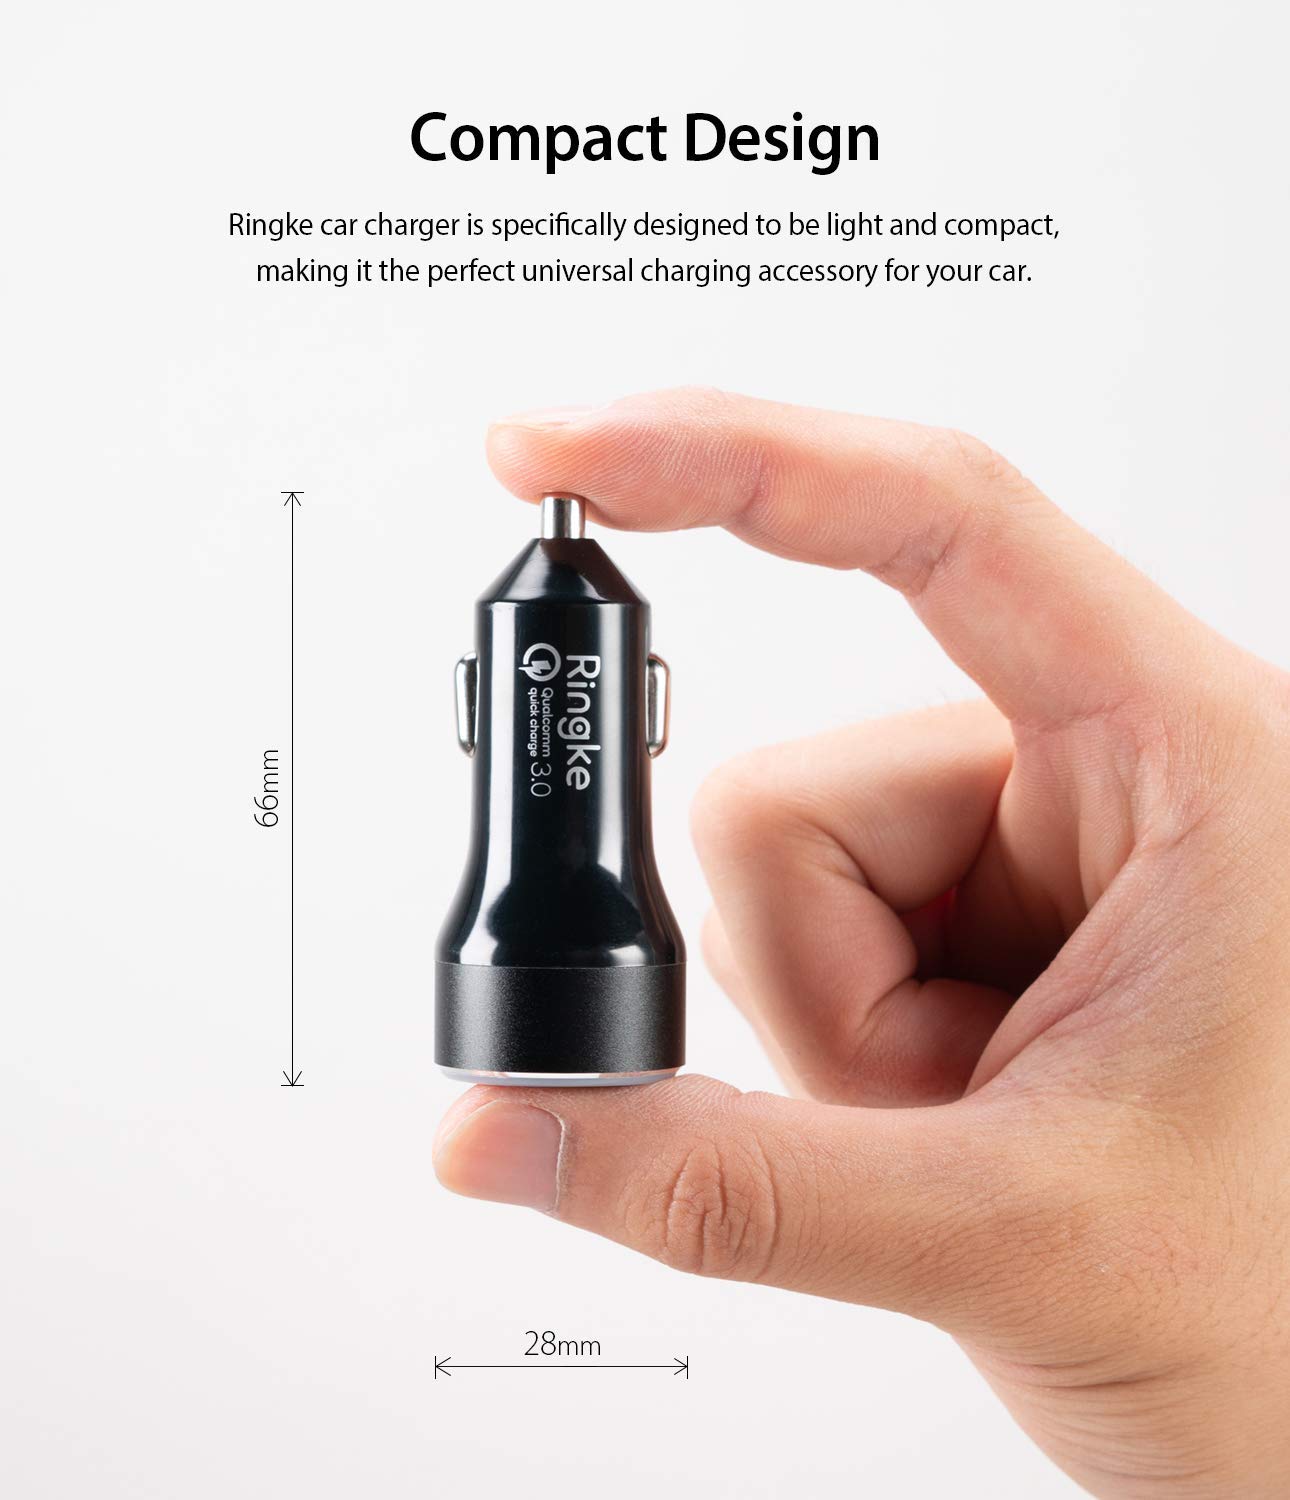 ringke realx2 quick charge 3.0 compact design